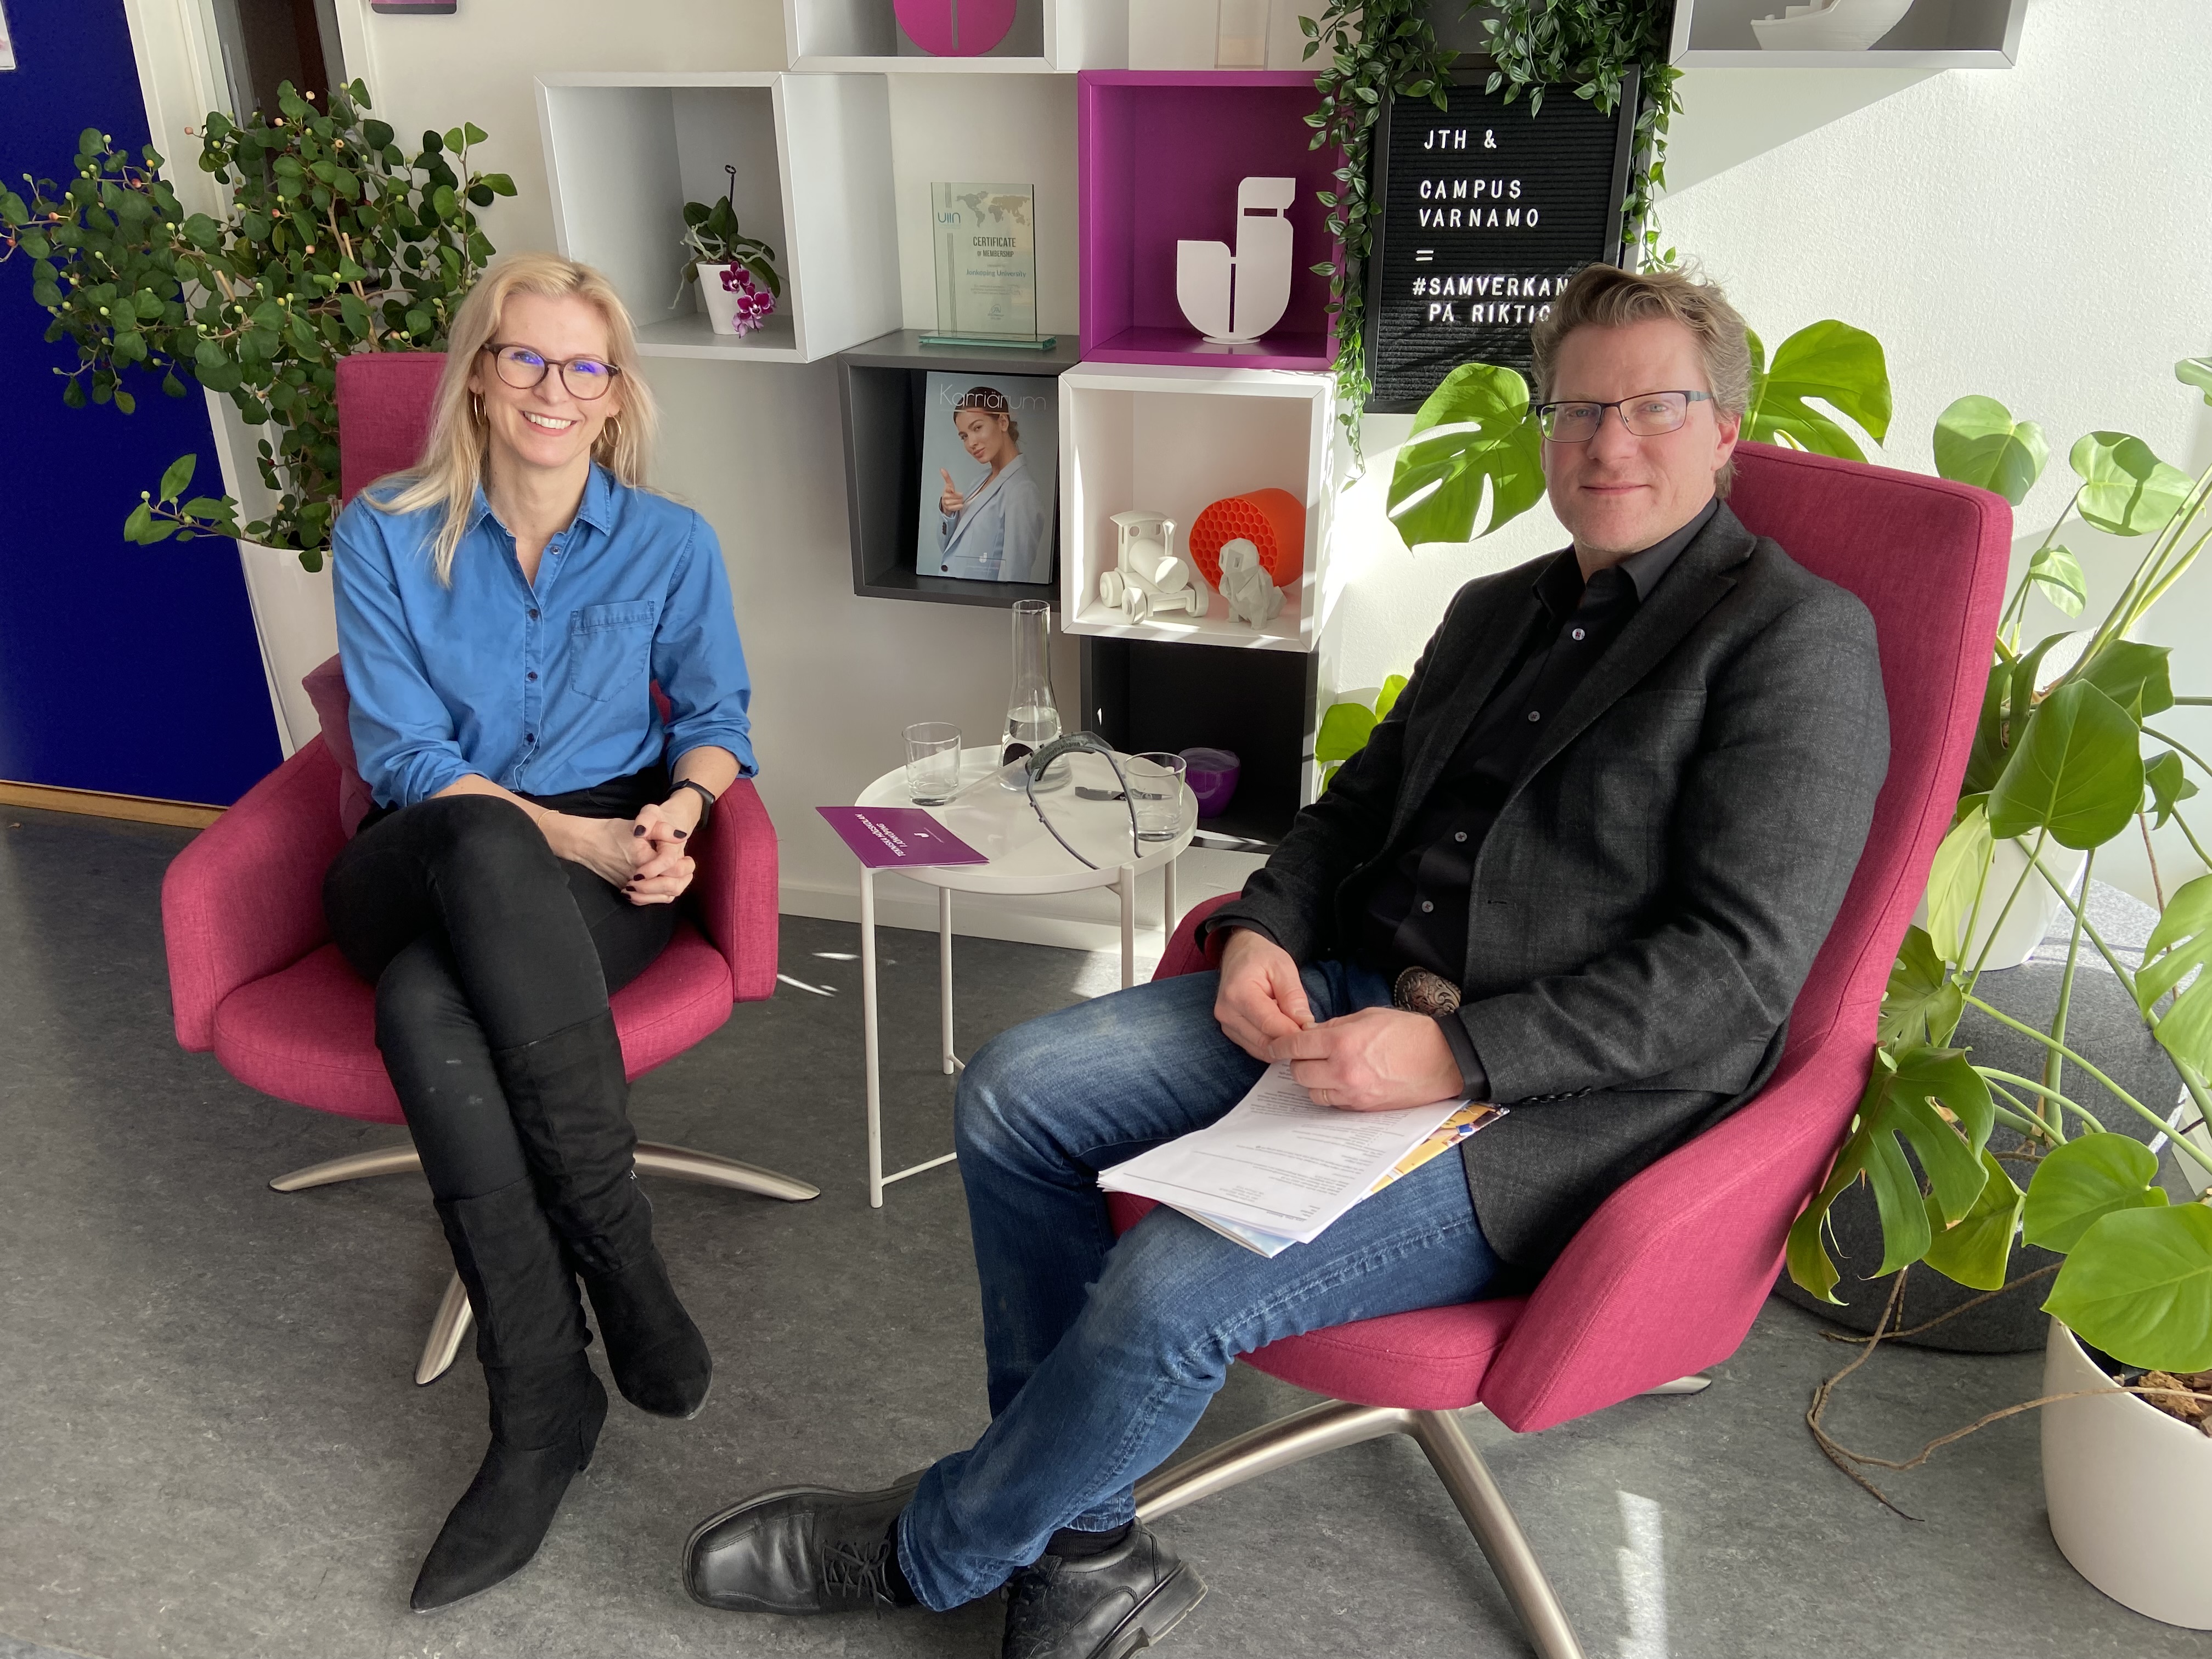 Linda Bergqvist, External Relations Manager, and Lars-Uno Åkesson, Competence Academy accountable at Campus Värnamo.